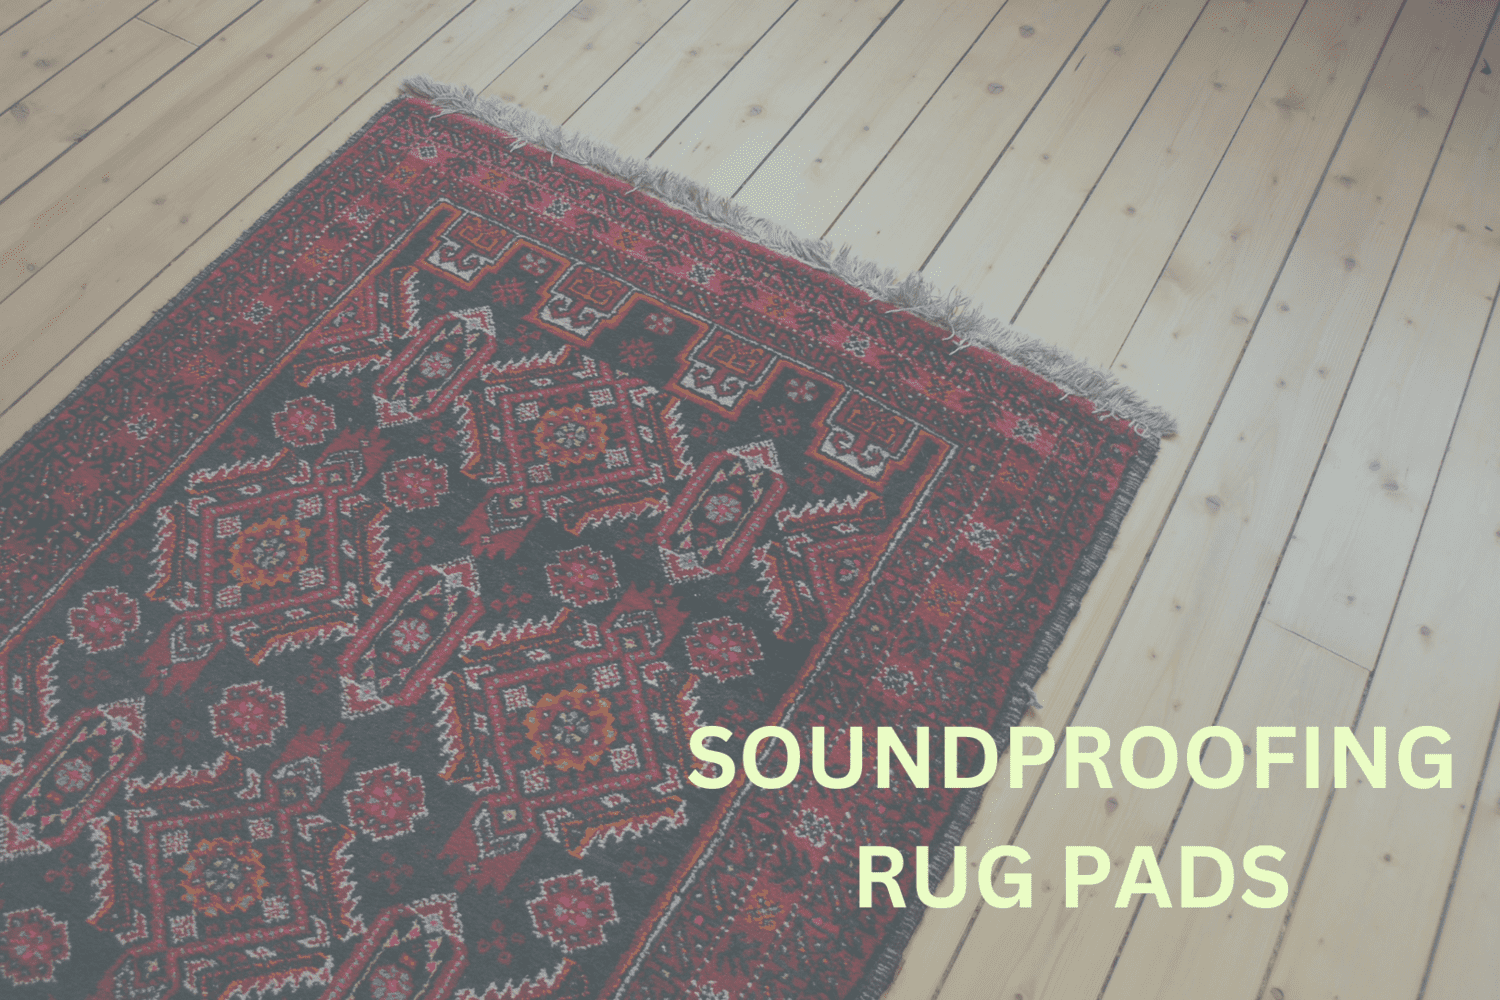 https://zensoundproof.com/wp-content/uploads/2023/02/Soundproofing-rug-pads-featured-image-1.png